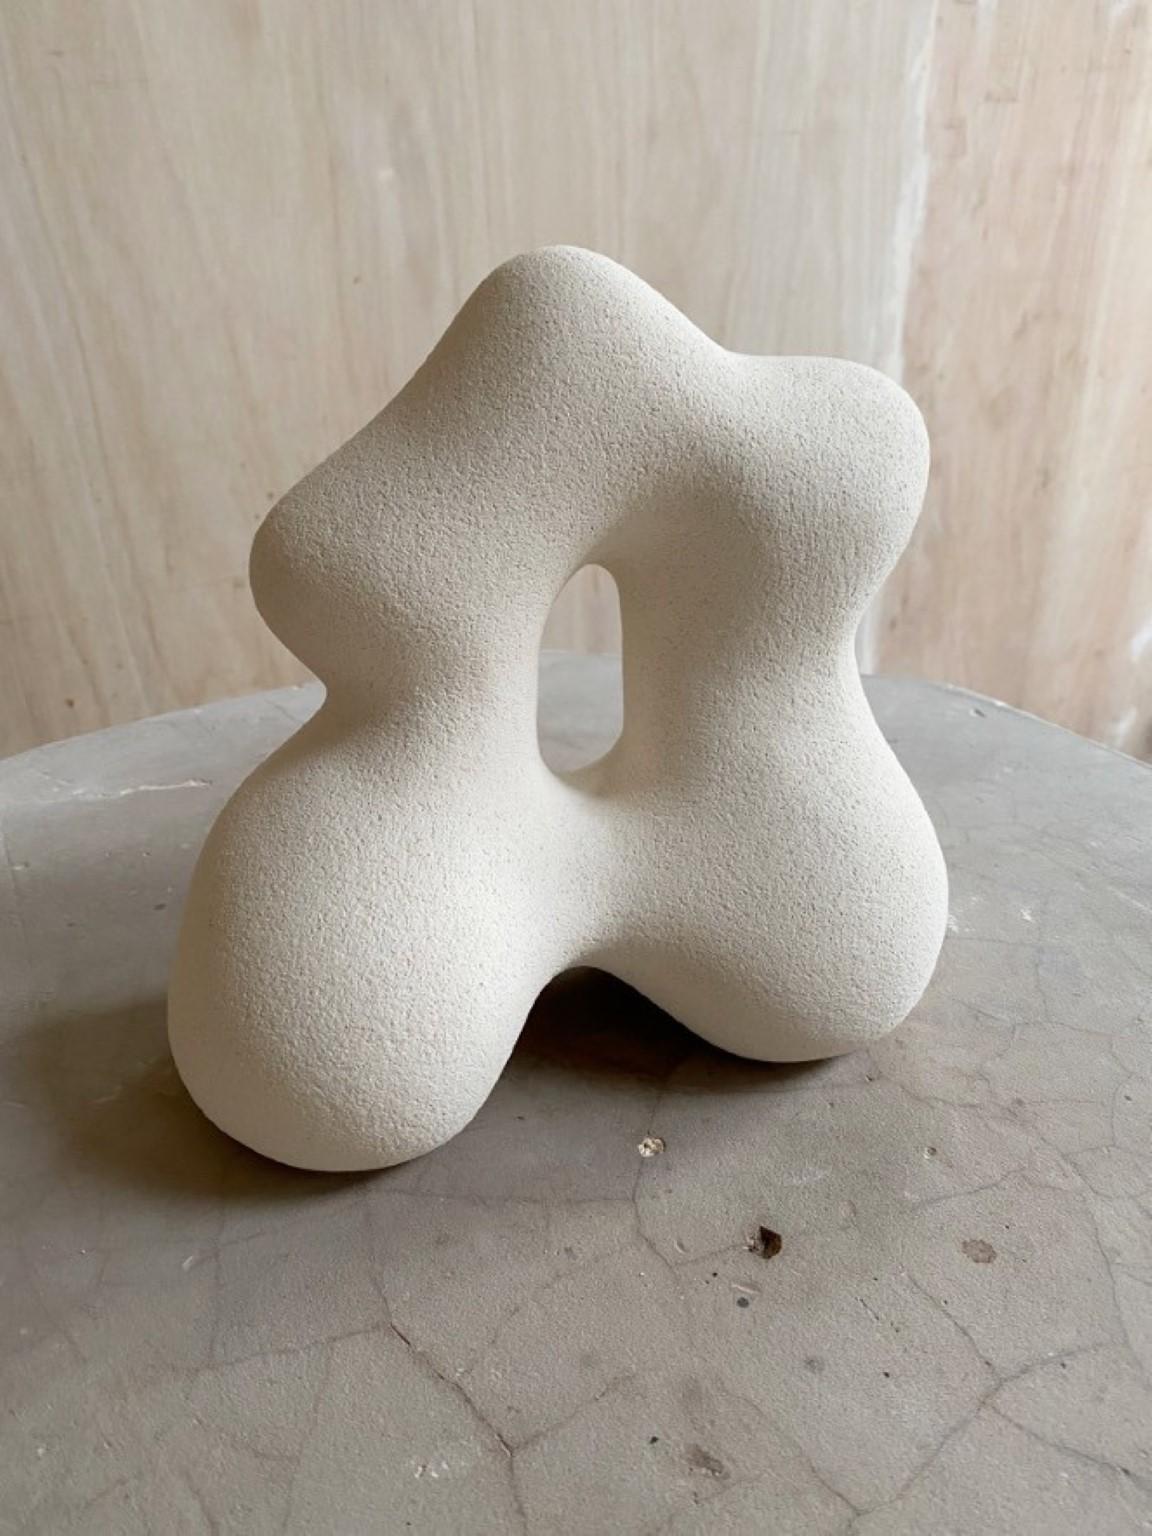 Sandstone Lou hand sculpted by Hermine Bourdin
Unique
Dimensions: W 24 x H 22 cm
Materials: Sandstone

In my work I’m trying to represent women who are free, who are generous, voluptuous, sensual, strong, thriving and protective.

To me, each woman